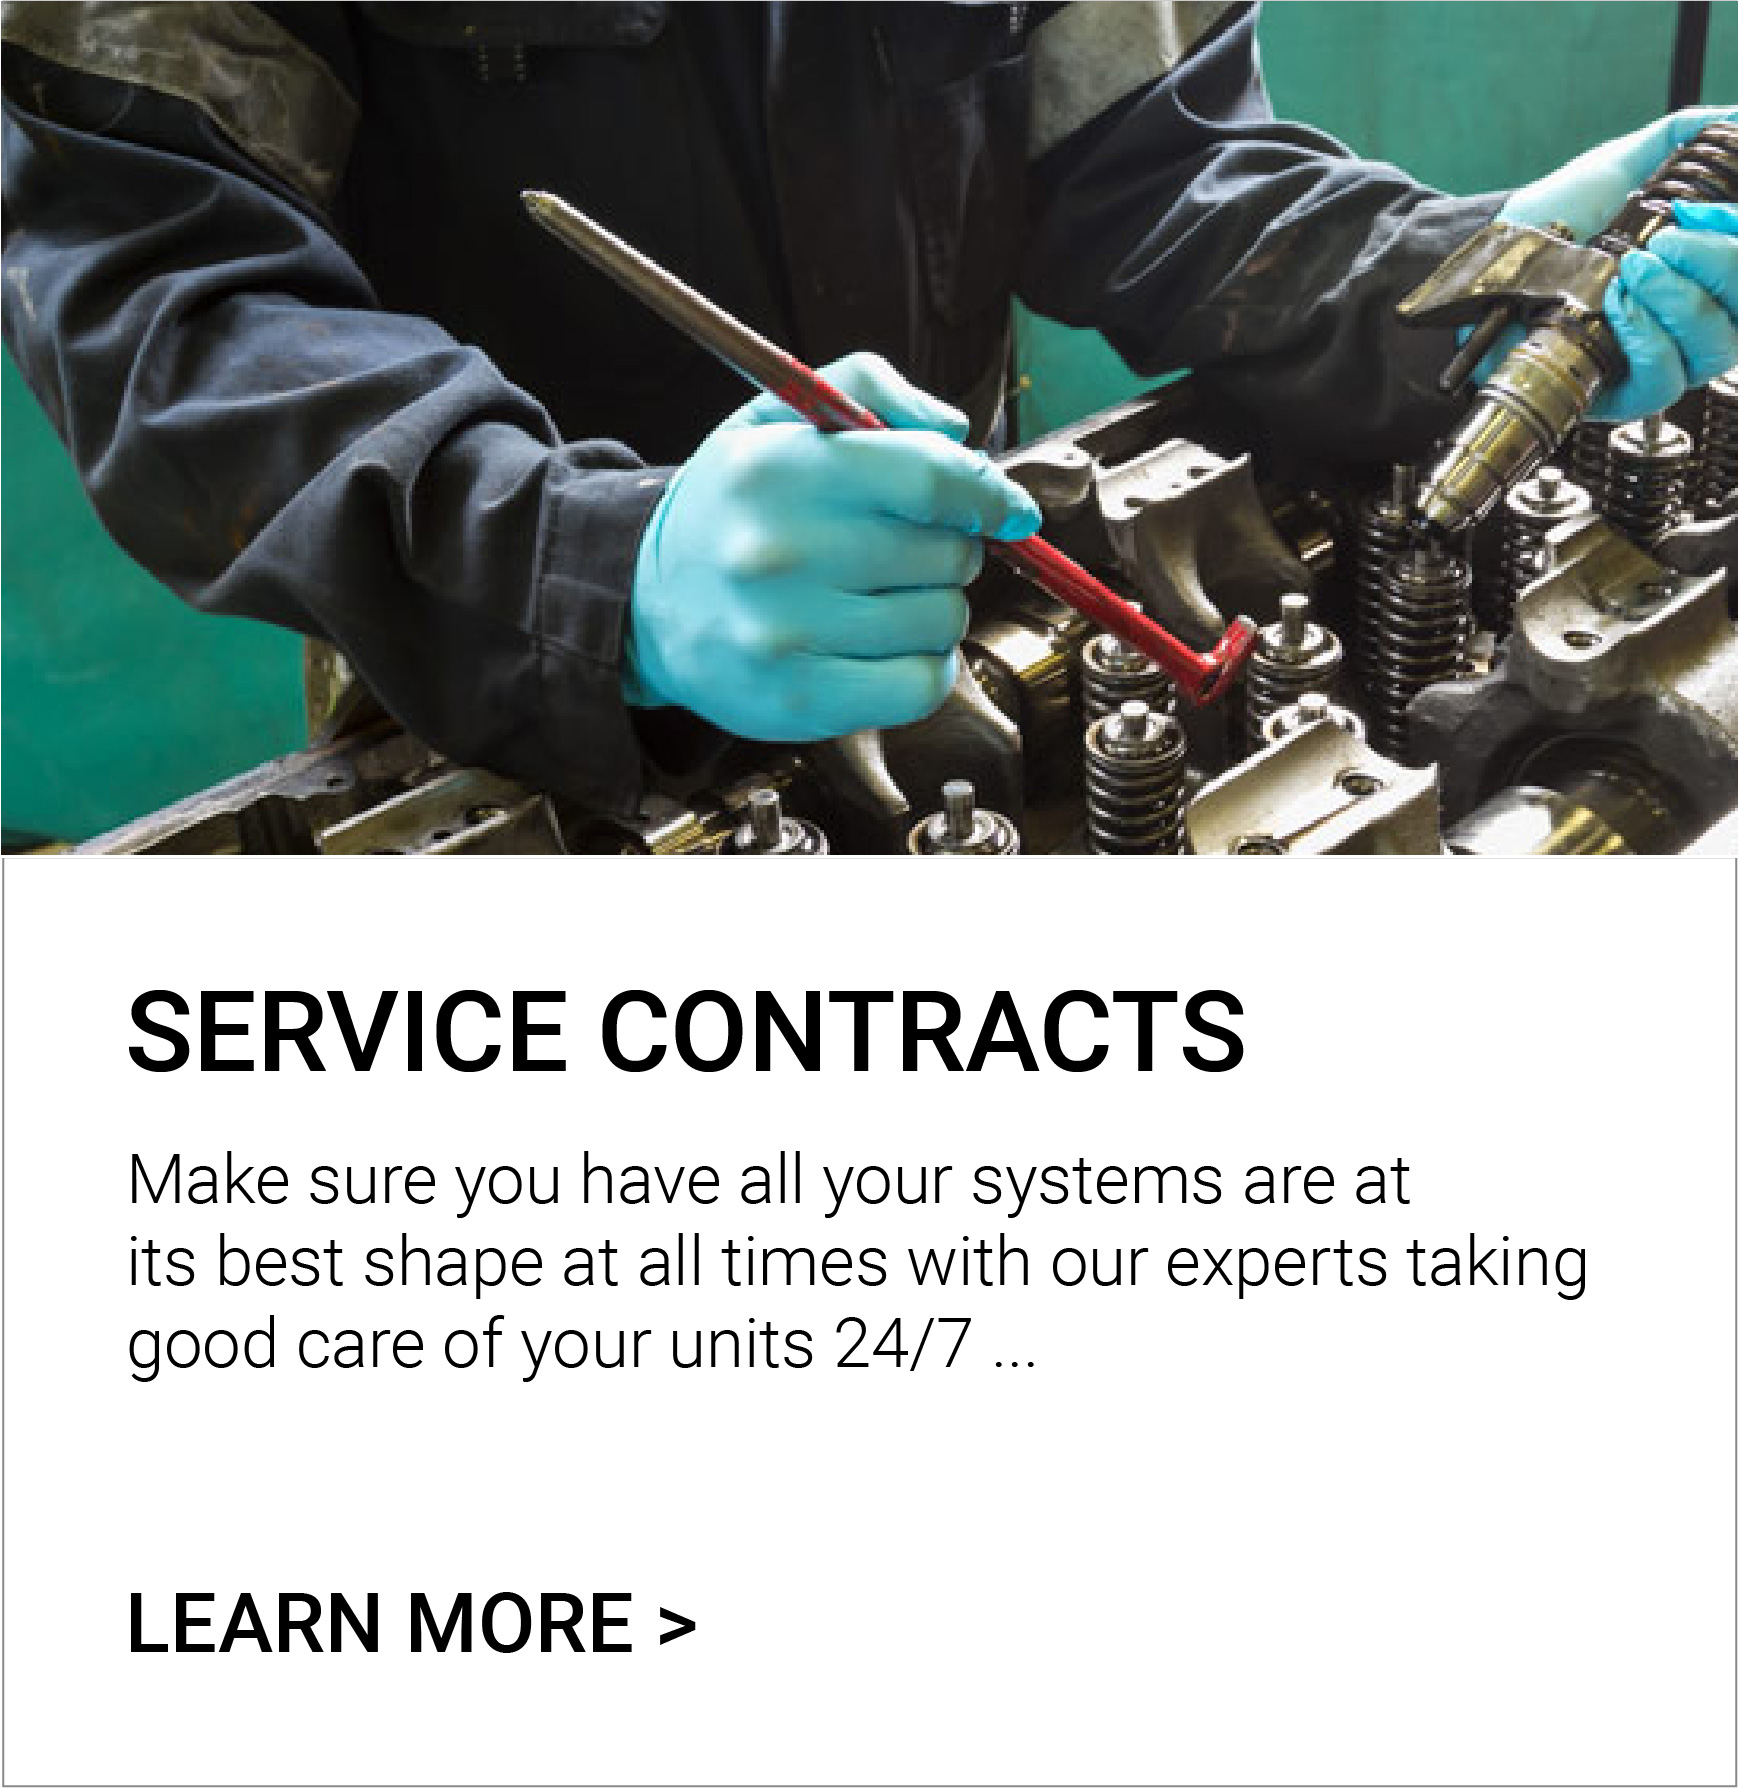 Service contracts